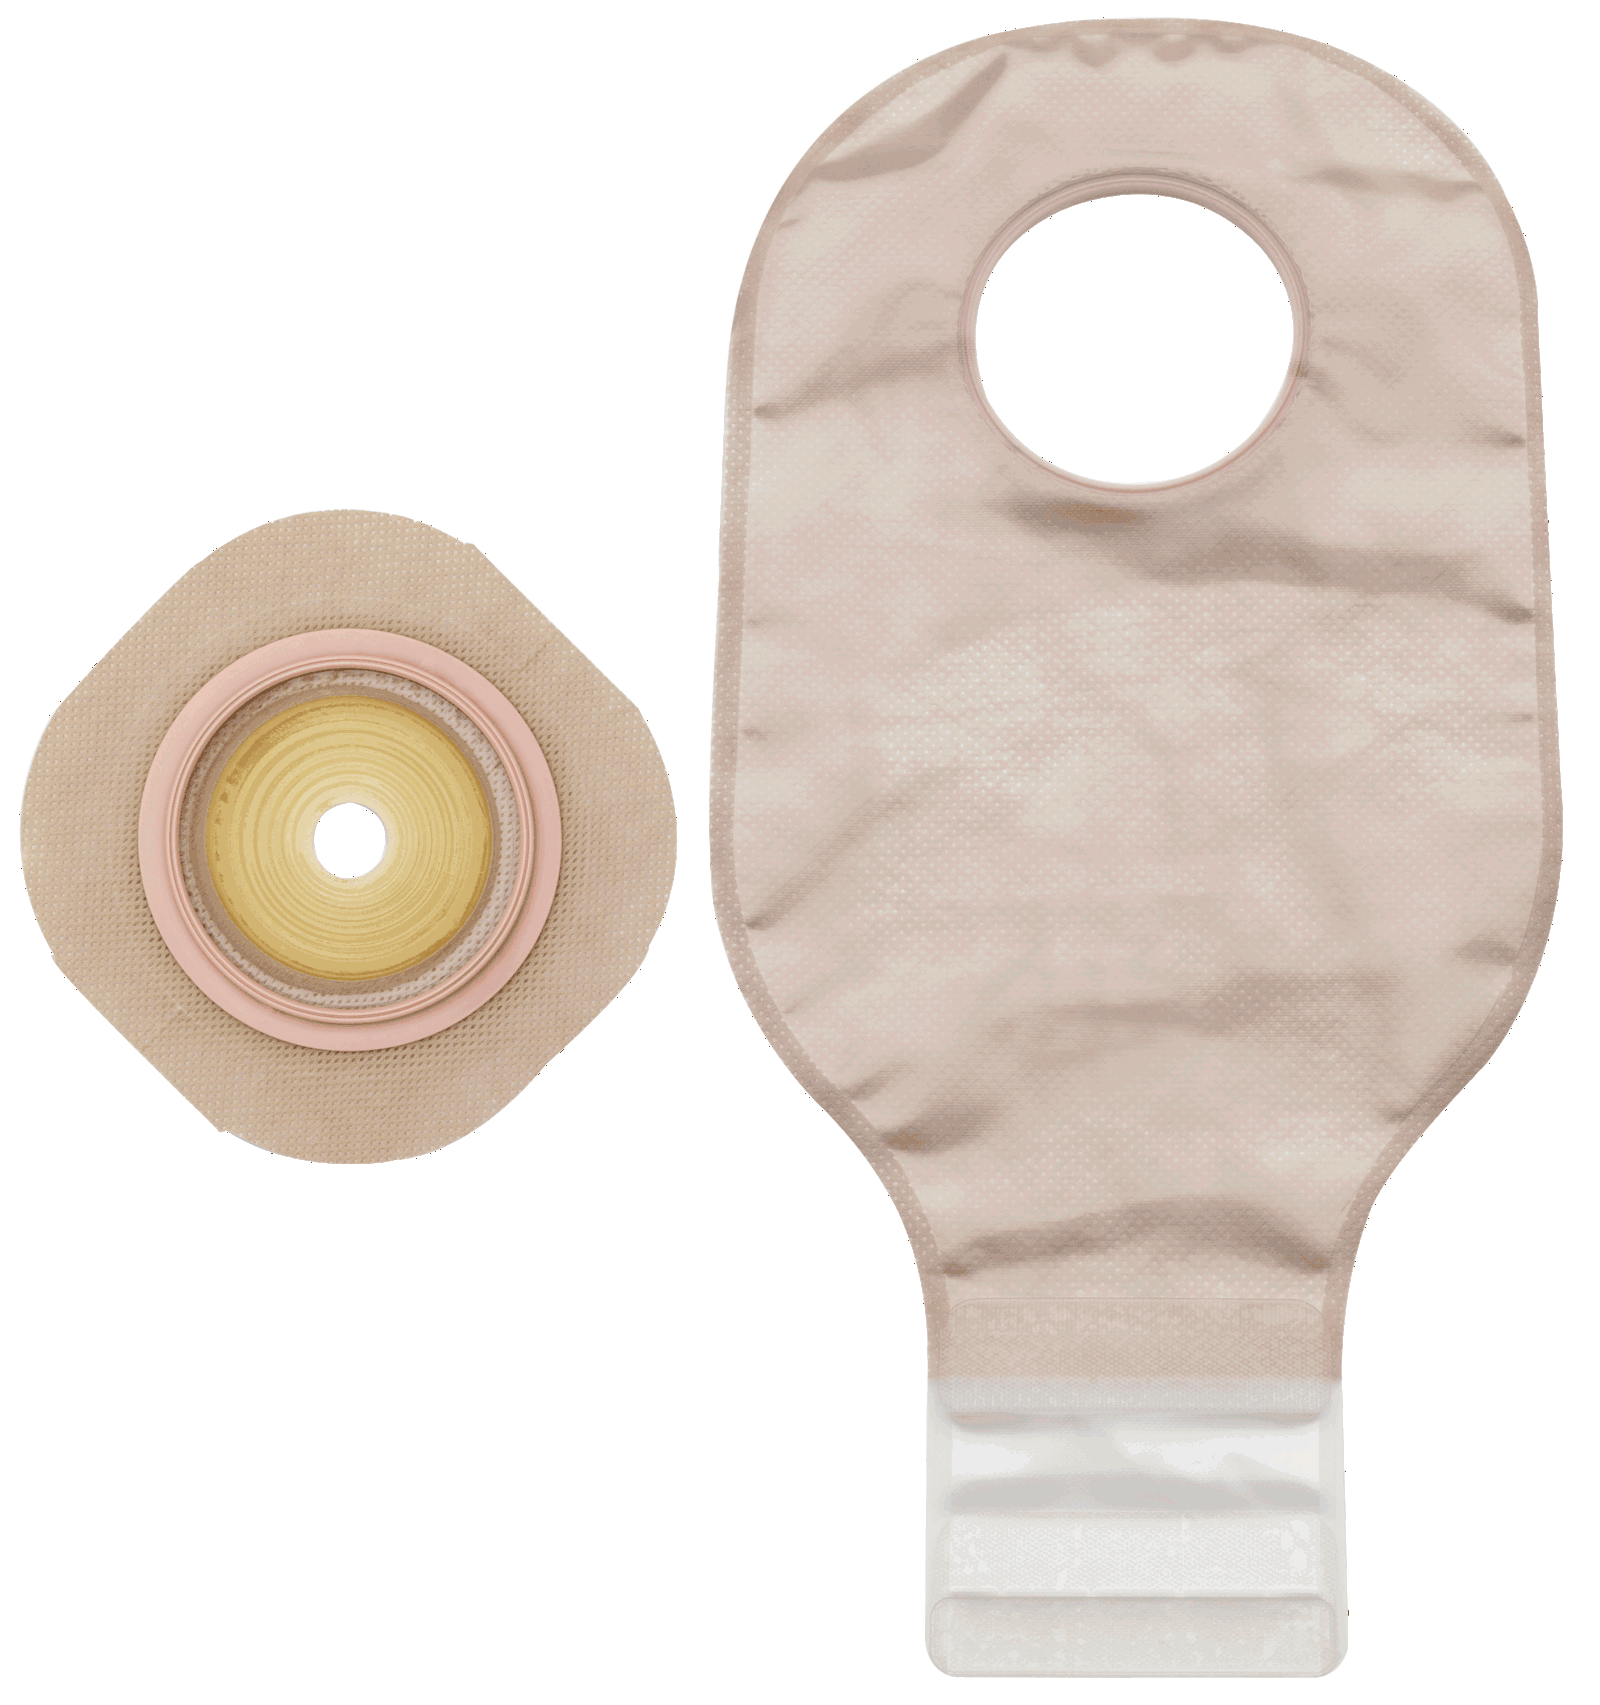 New Image Two-piece Kits w/FormaFlex Shape-to-Fit Skin Barrier 2-3/4"" - Homeline Medical